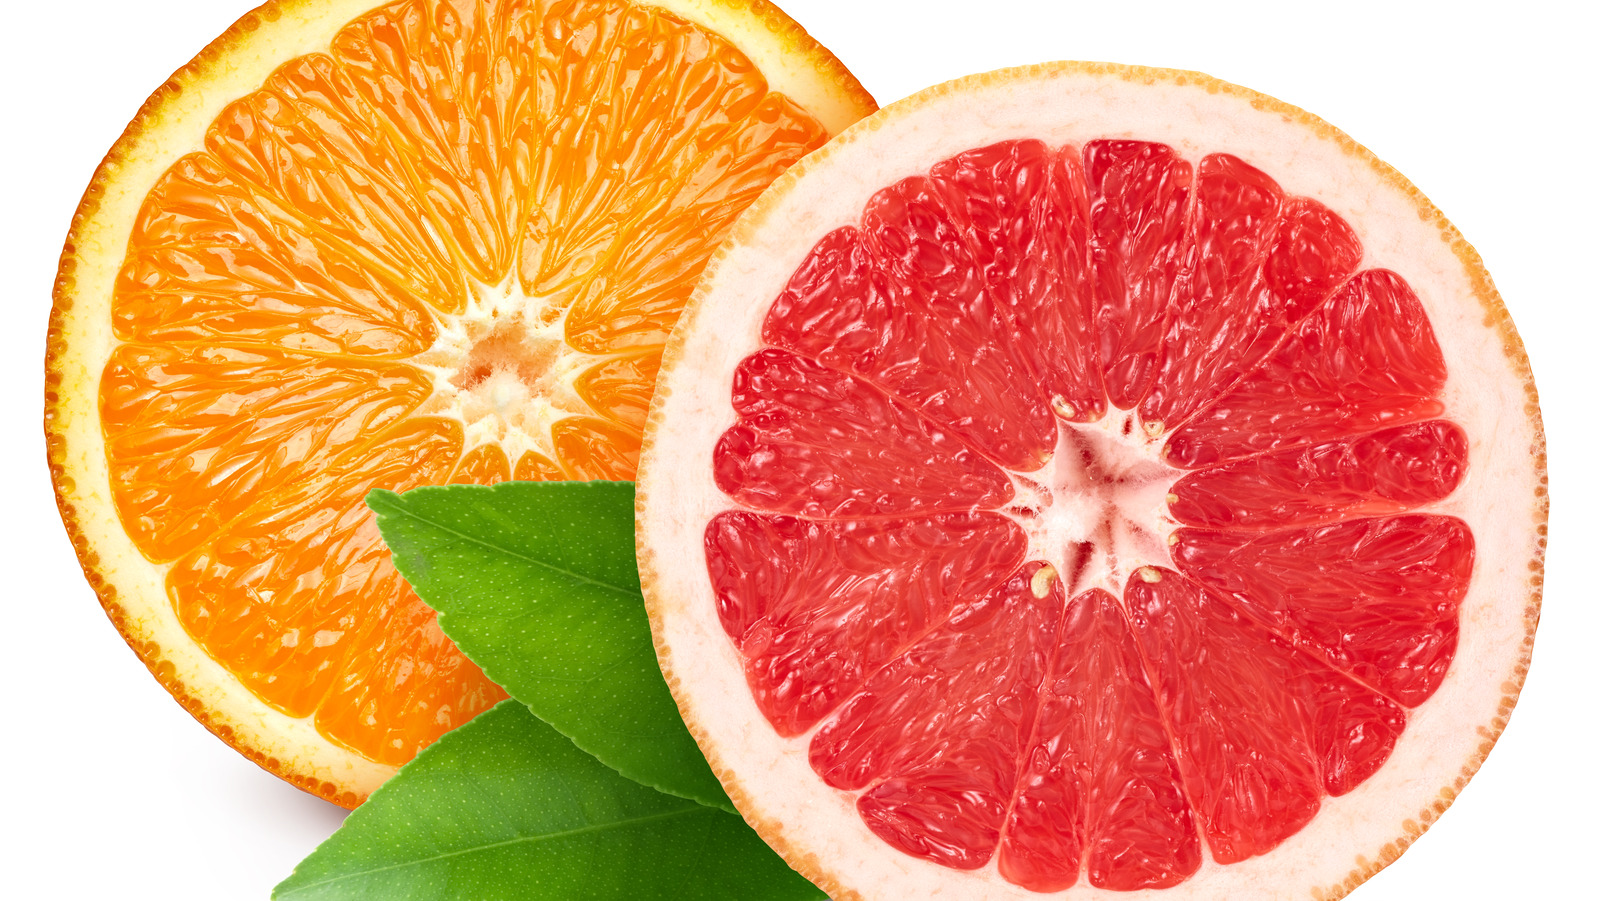 Is There A Nutritional Difference Between Oranges? Grapefruits And